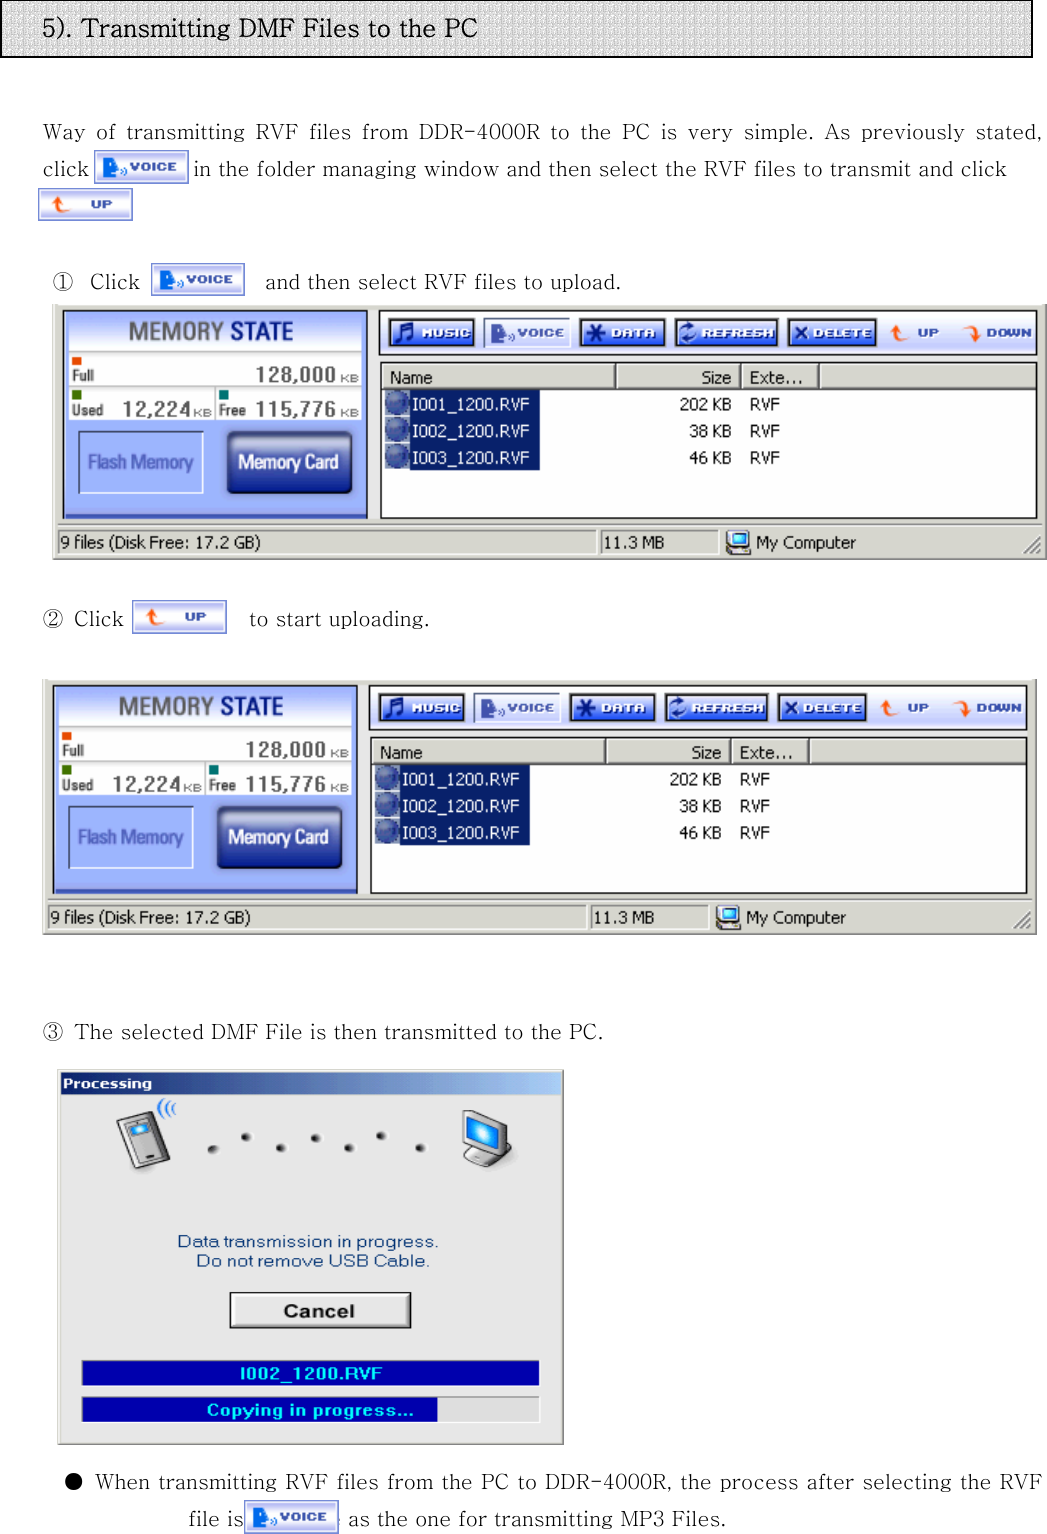      Way  of  transmitting  RVF  files  from  DDR-4000R  to  the  PC  is  very  simple.  As  previously  stated, click          in the folder managing window and then select the RVF files to transmit and click              ①  Click            and then select RVF files to upload.    ② Click            to start uploading.               ③  The selected DMF File is then transmitted to the PC.                            ●  When transmitting RVF files from the PC to DDR-4000R, the process after selecting the RVF          file is the same as the one for transmitting MP3 Files.                5). Transmitting DMF Files to the PC 